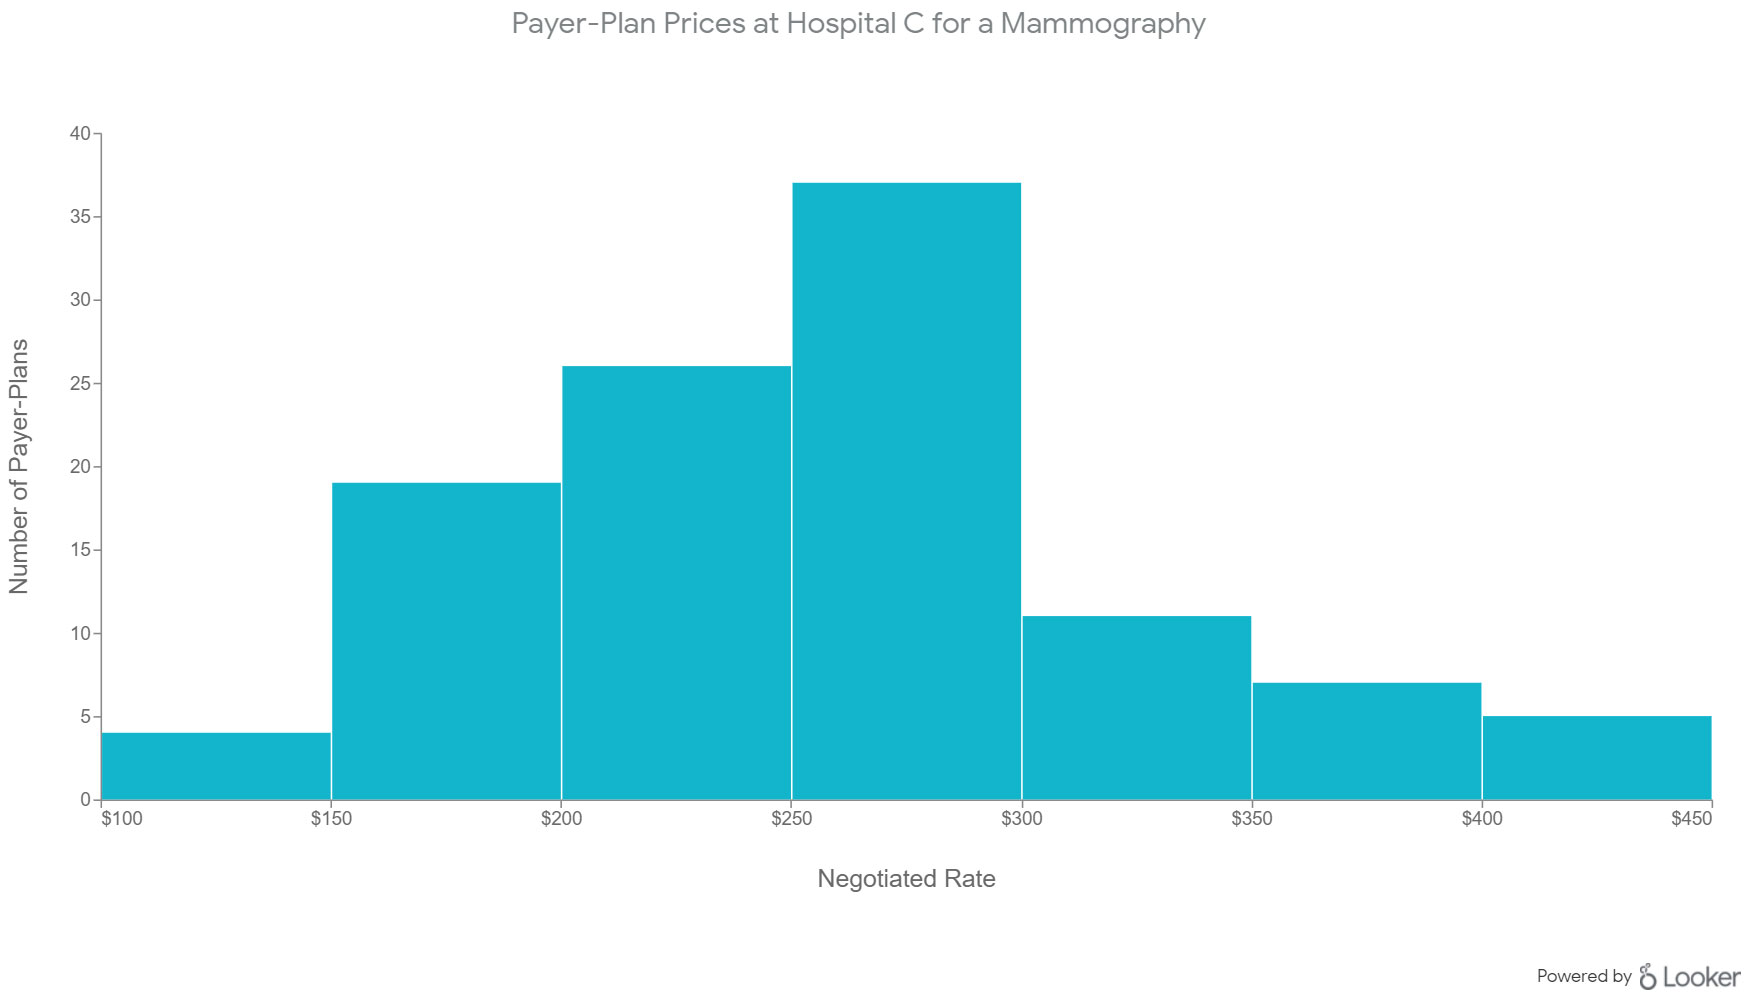 Payer-Plan Prices at Hospital C for a Mammography